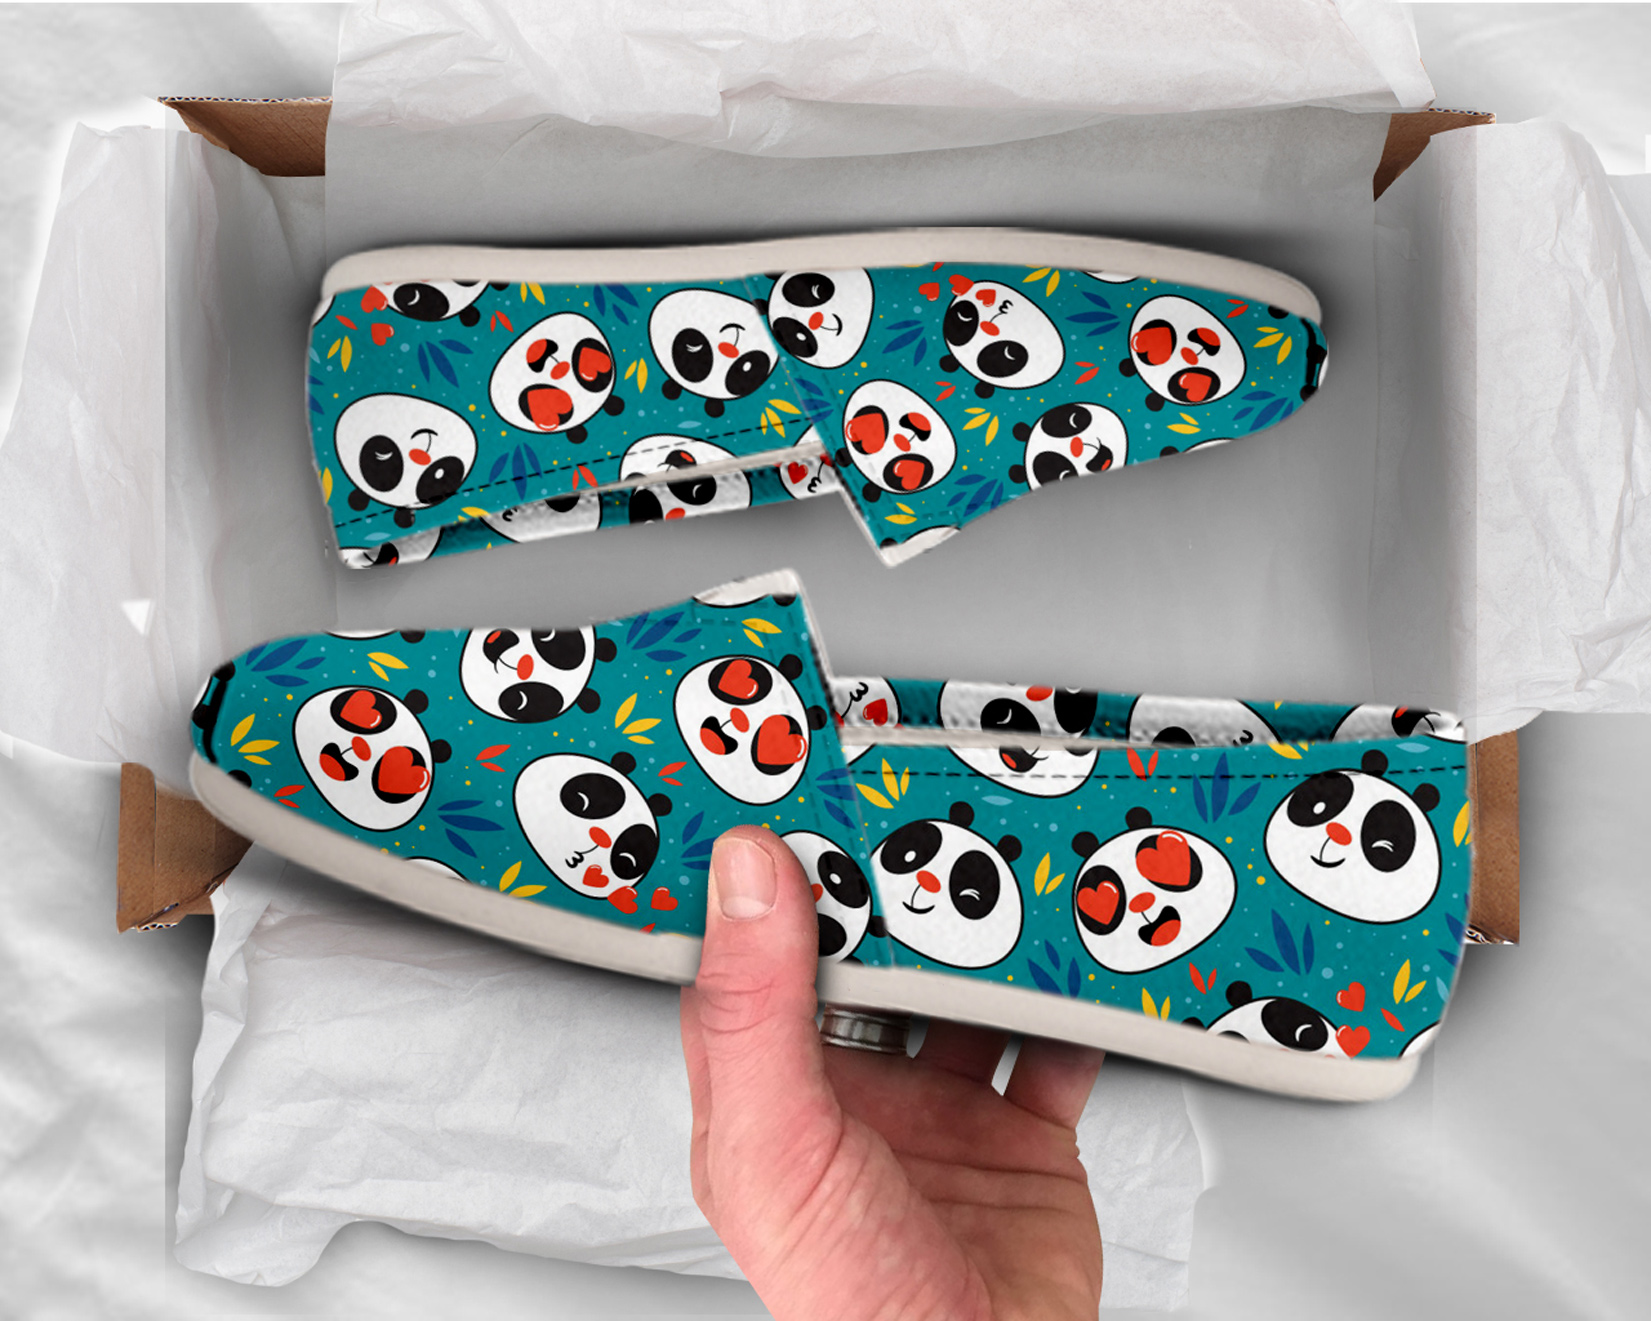 Slip-On Panda Shoes | Custom Canvas Sneakers For Kids & Adults